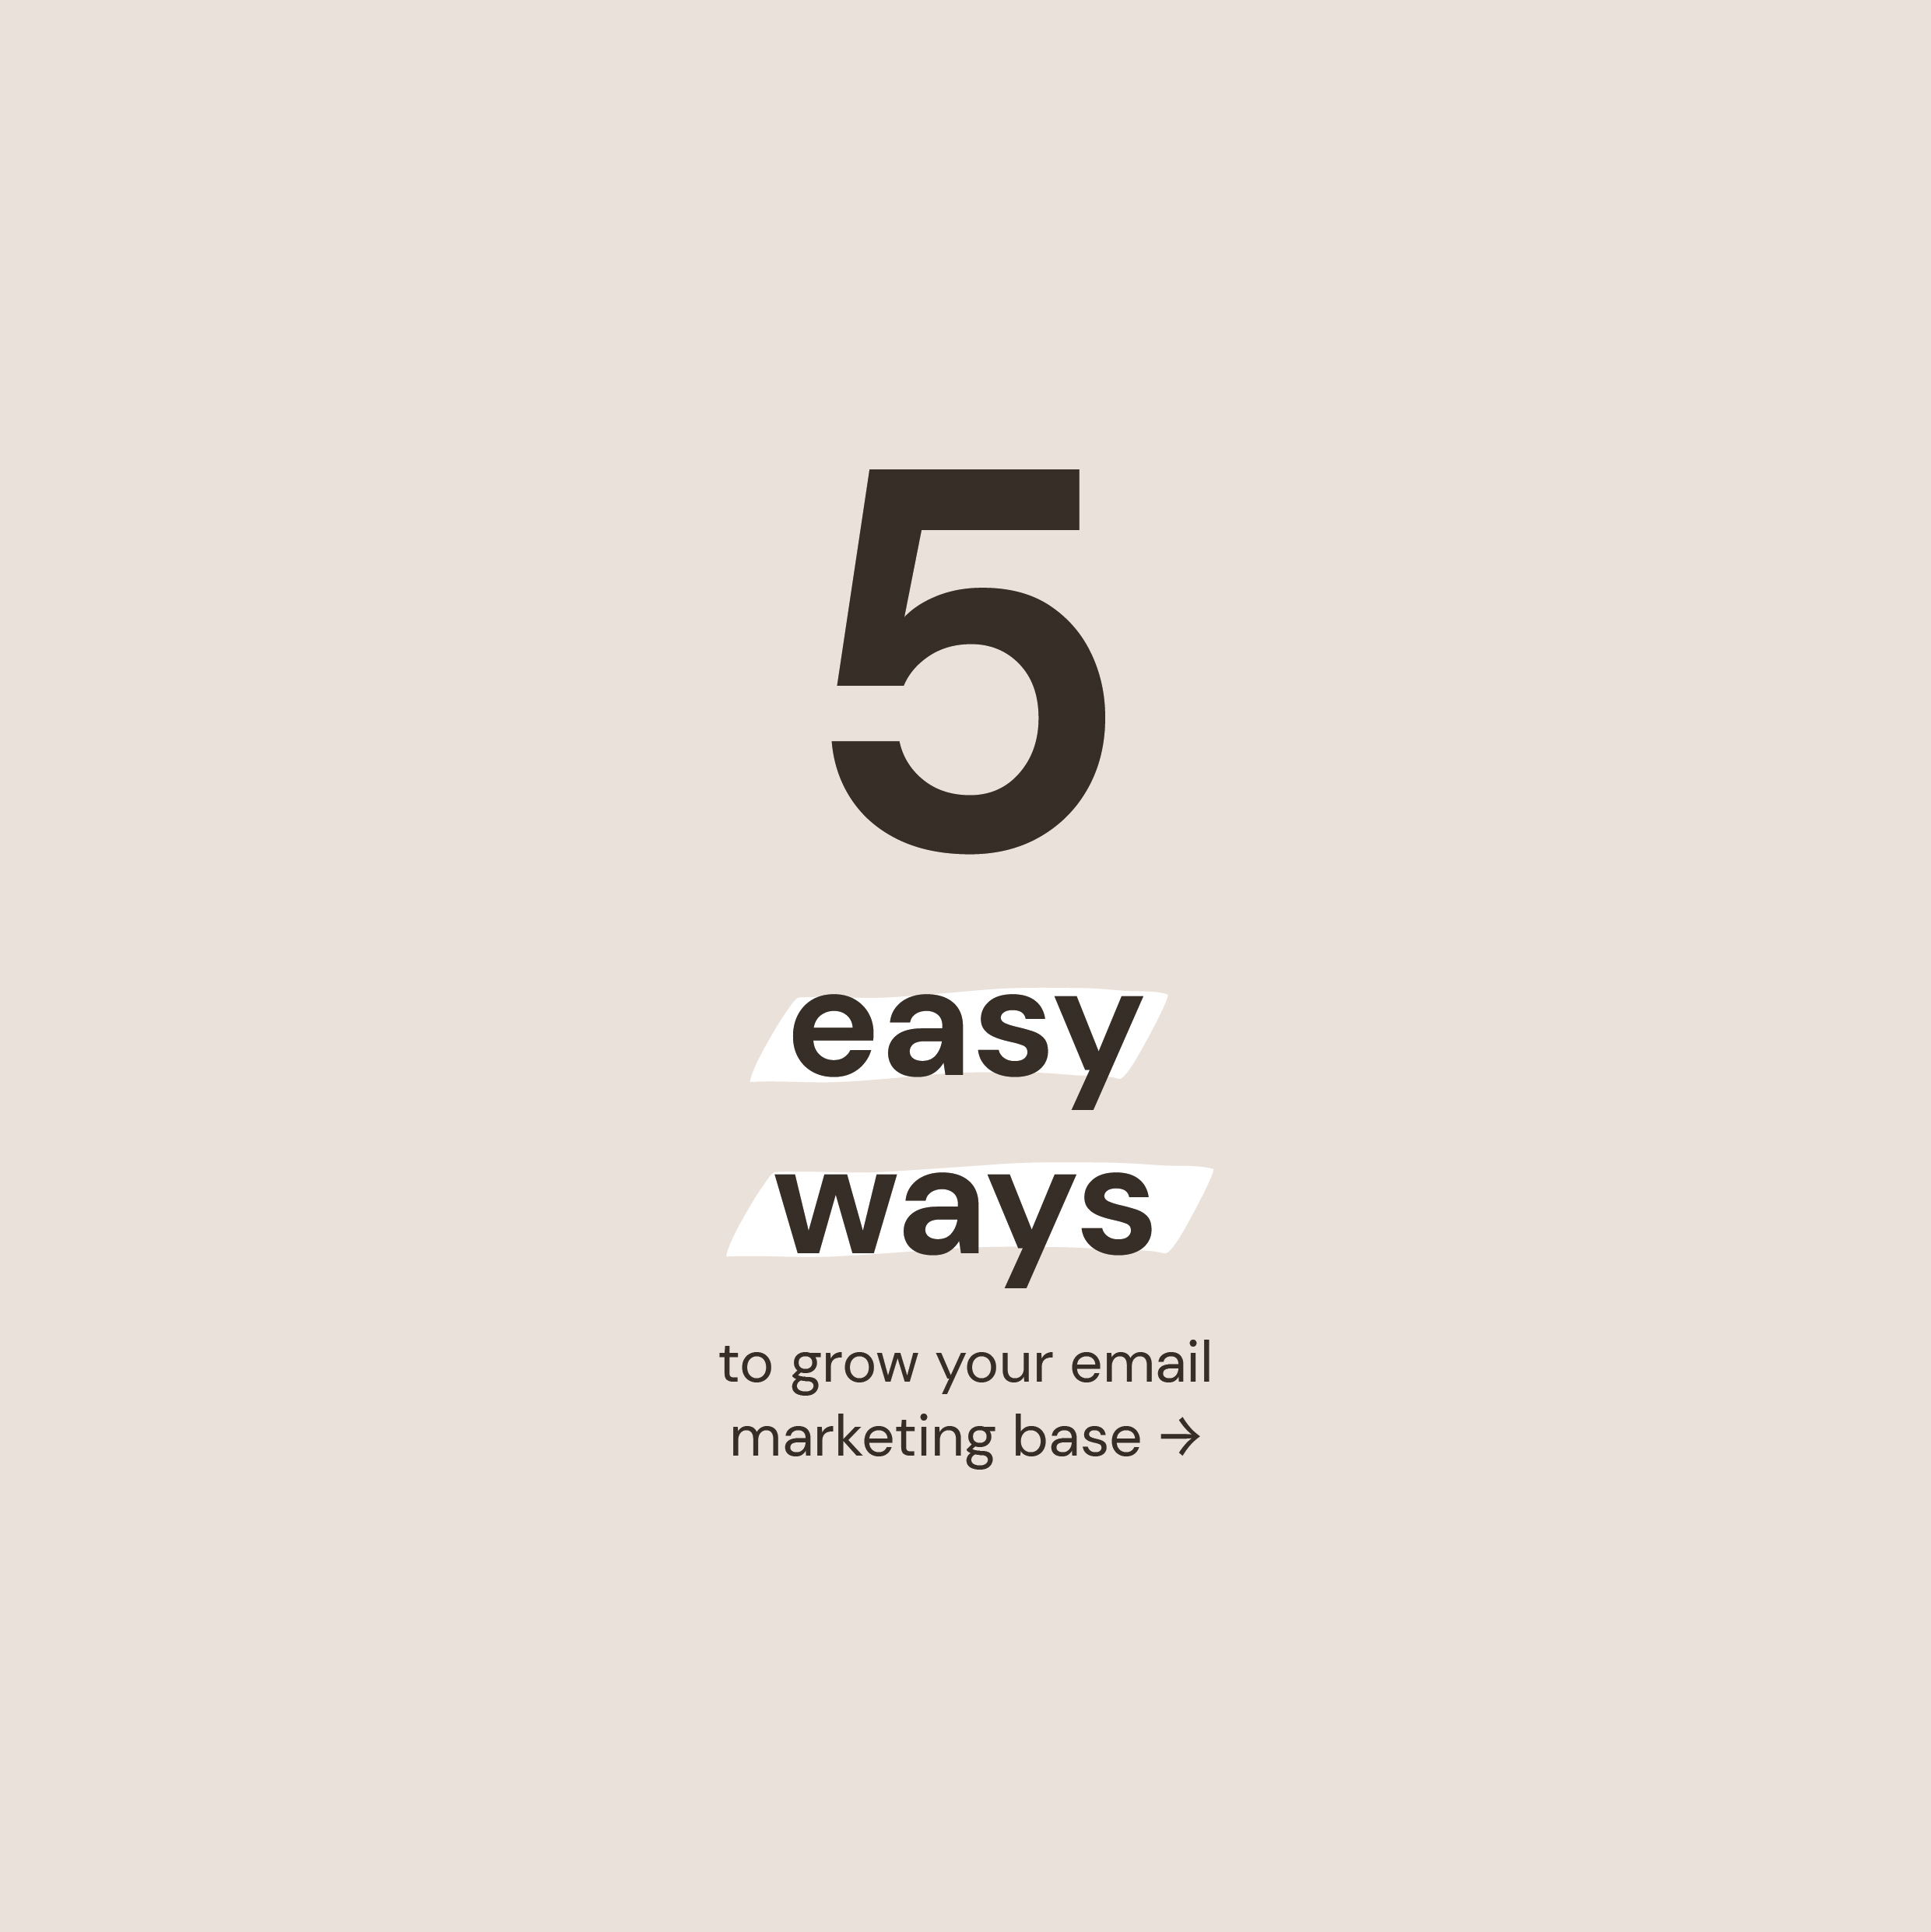 5 Easy Ways to Grow Your Email Marketing Base